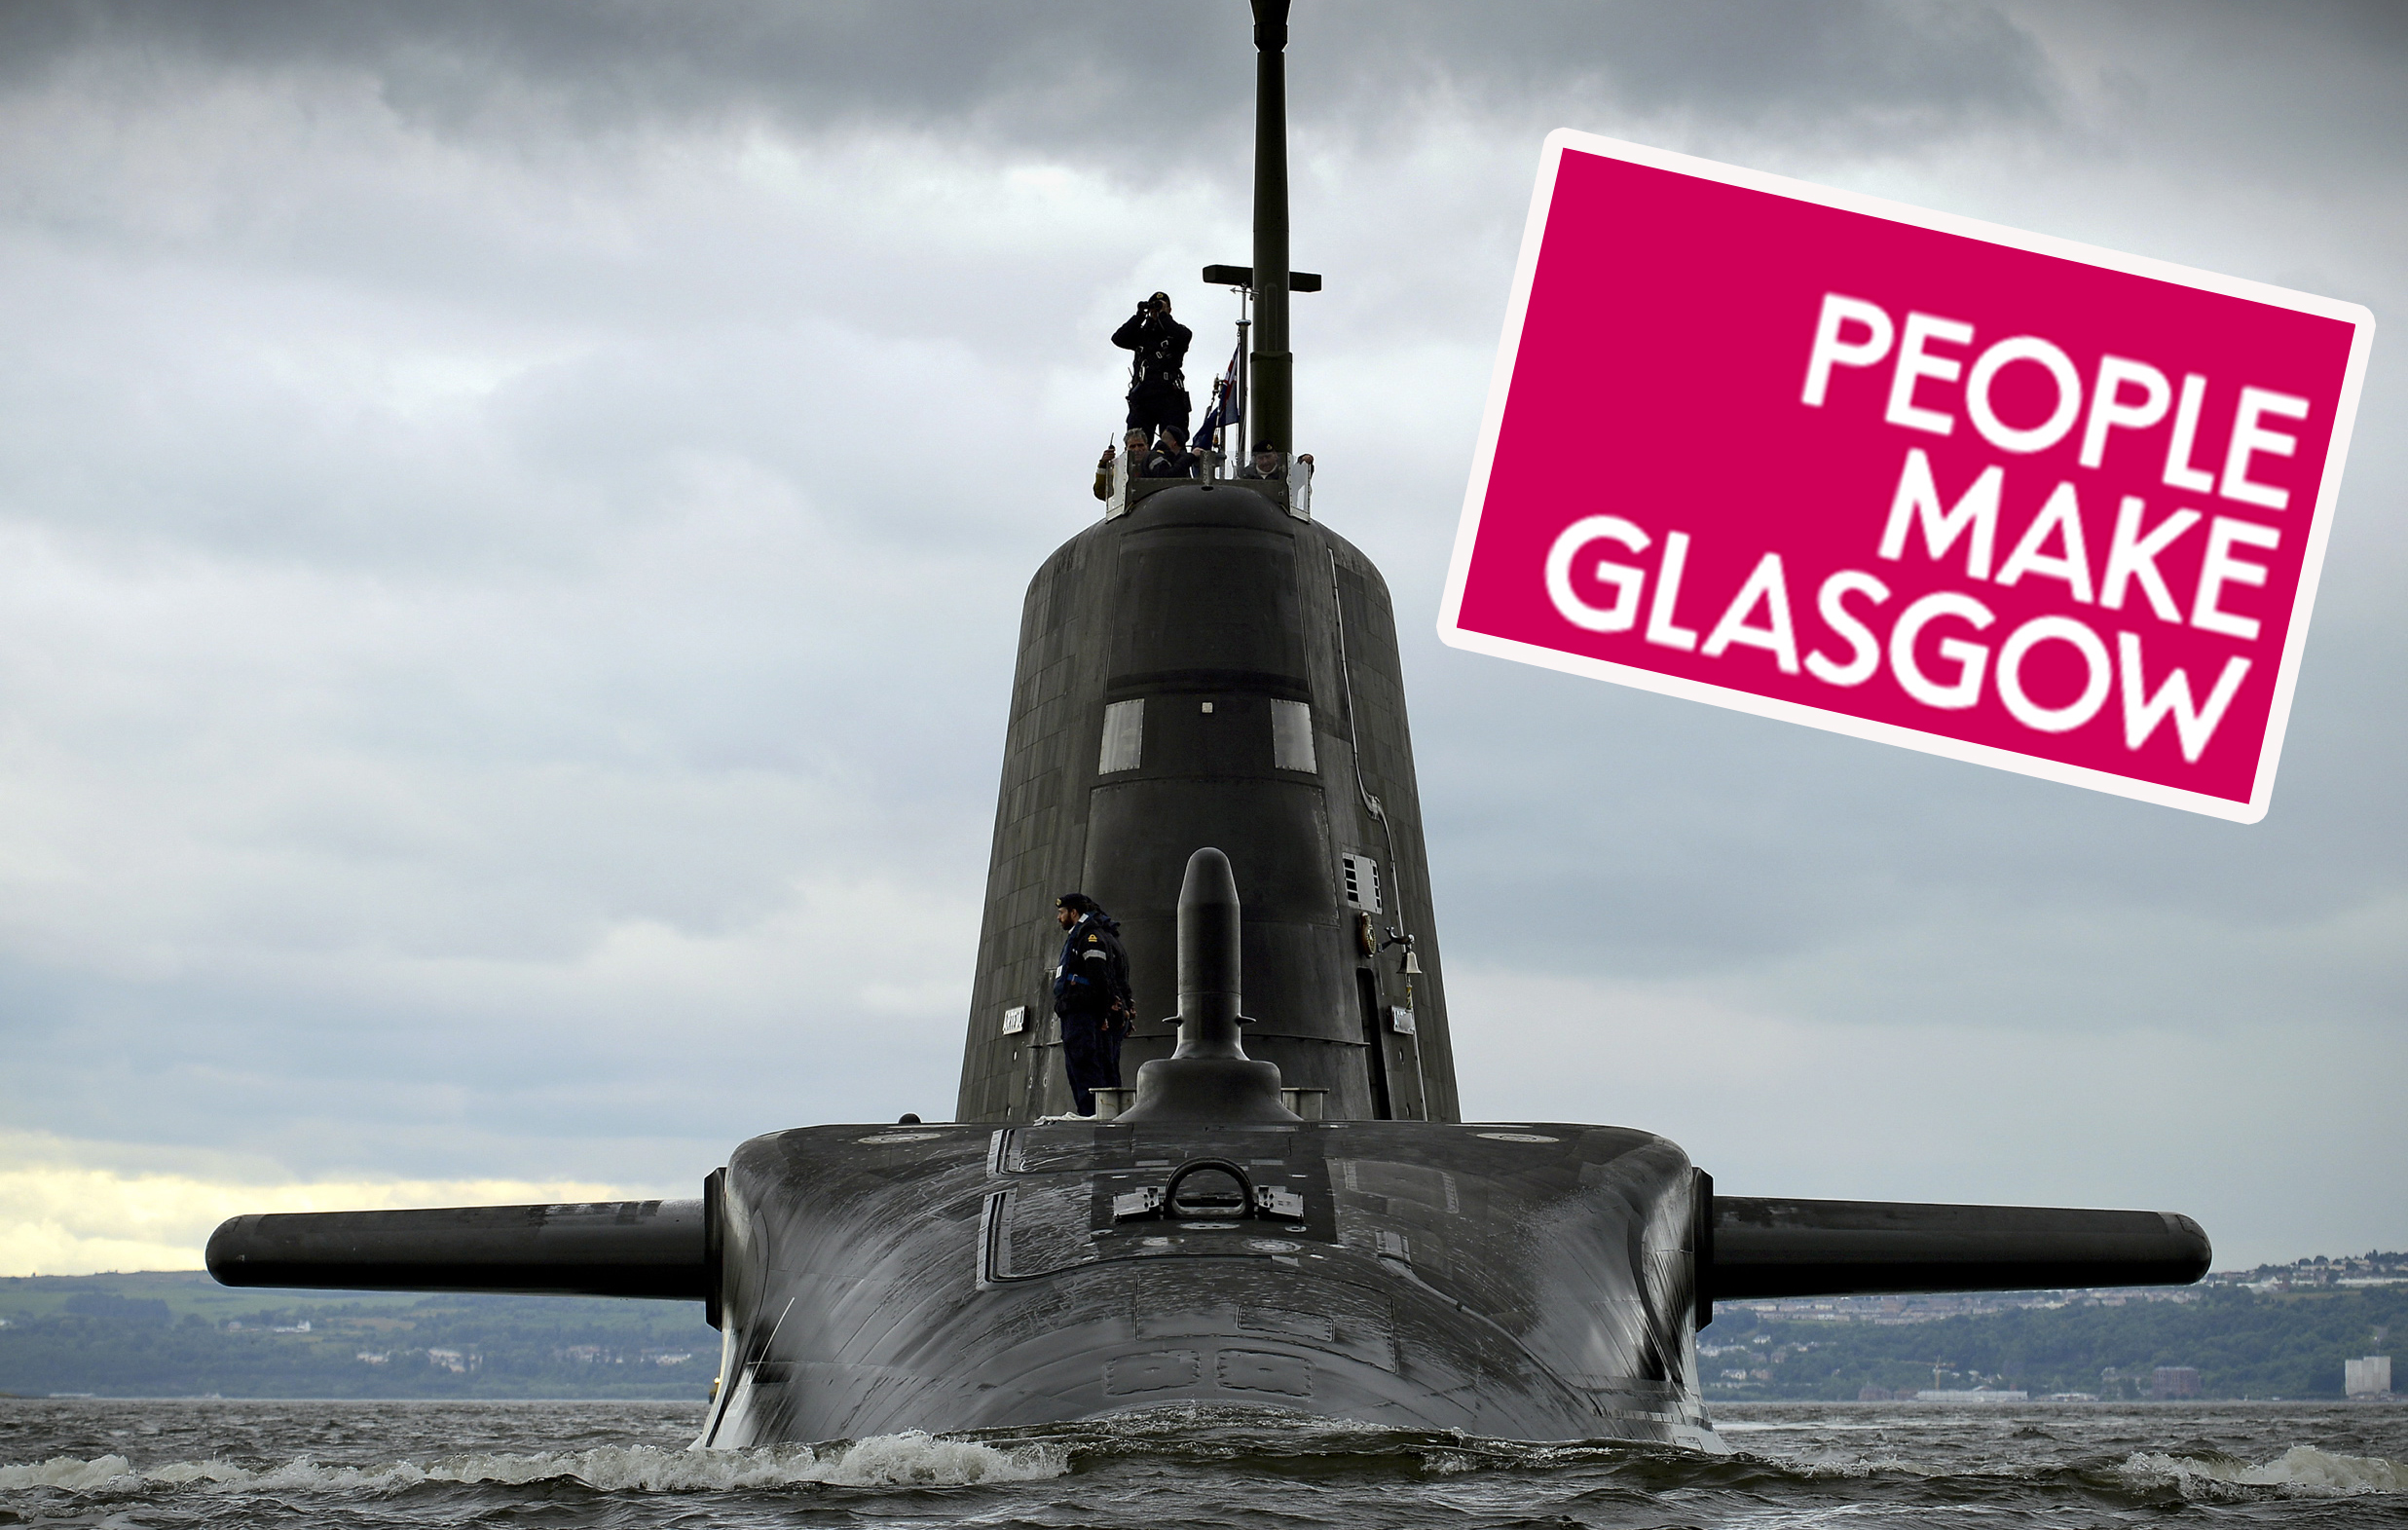 An Astute class sub in the Clyde, like the one being used to promote arms fair, can be fitted with Tomahawk missiles